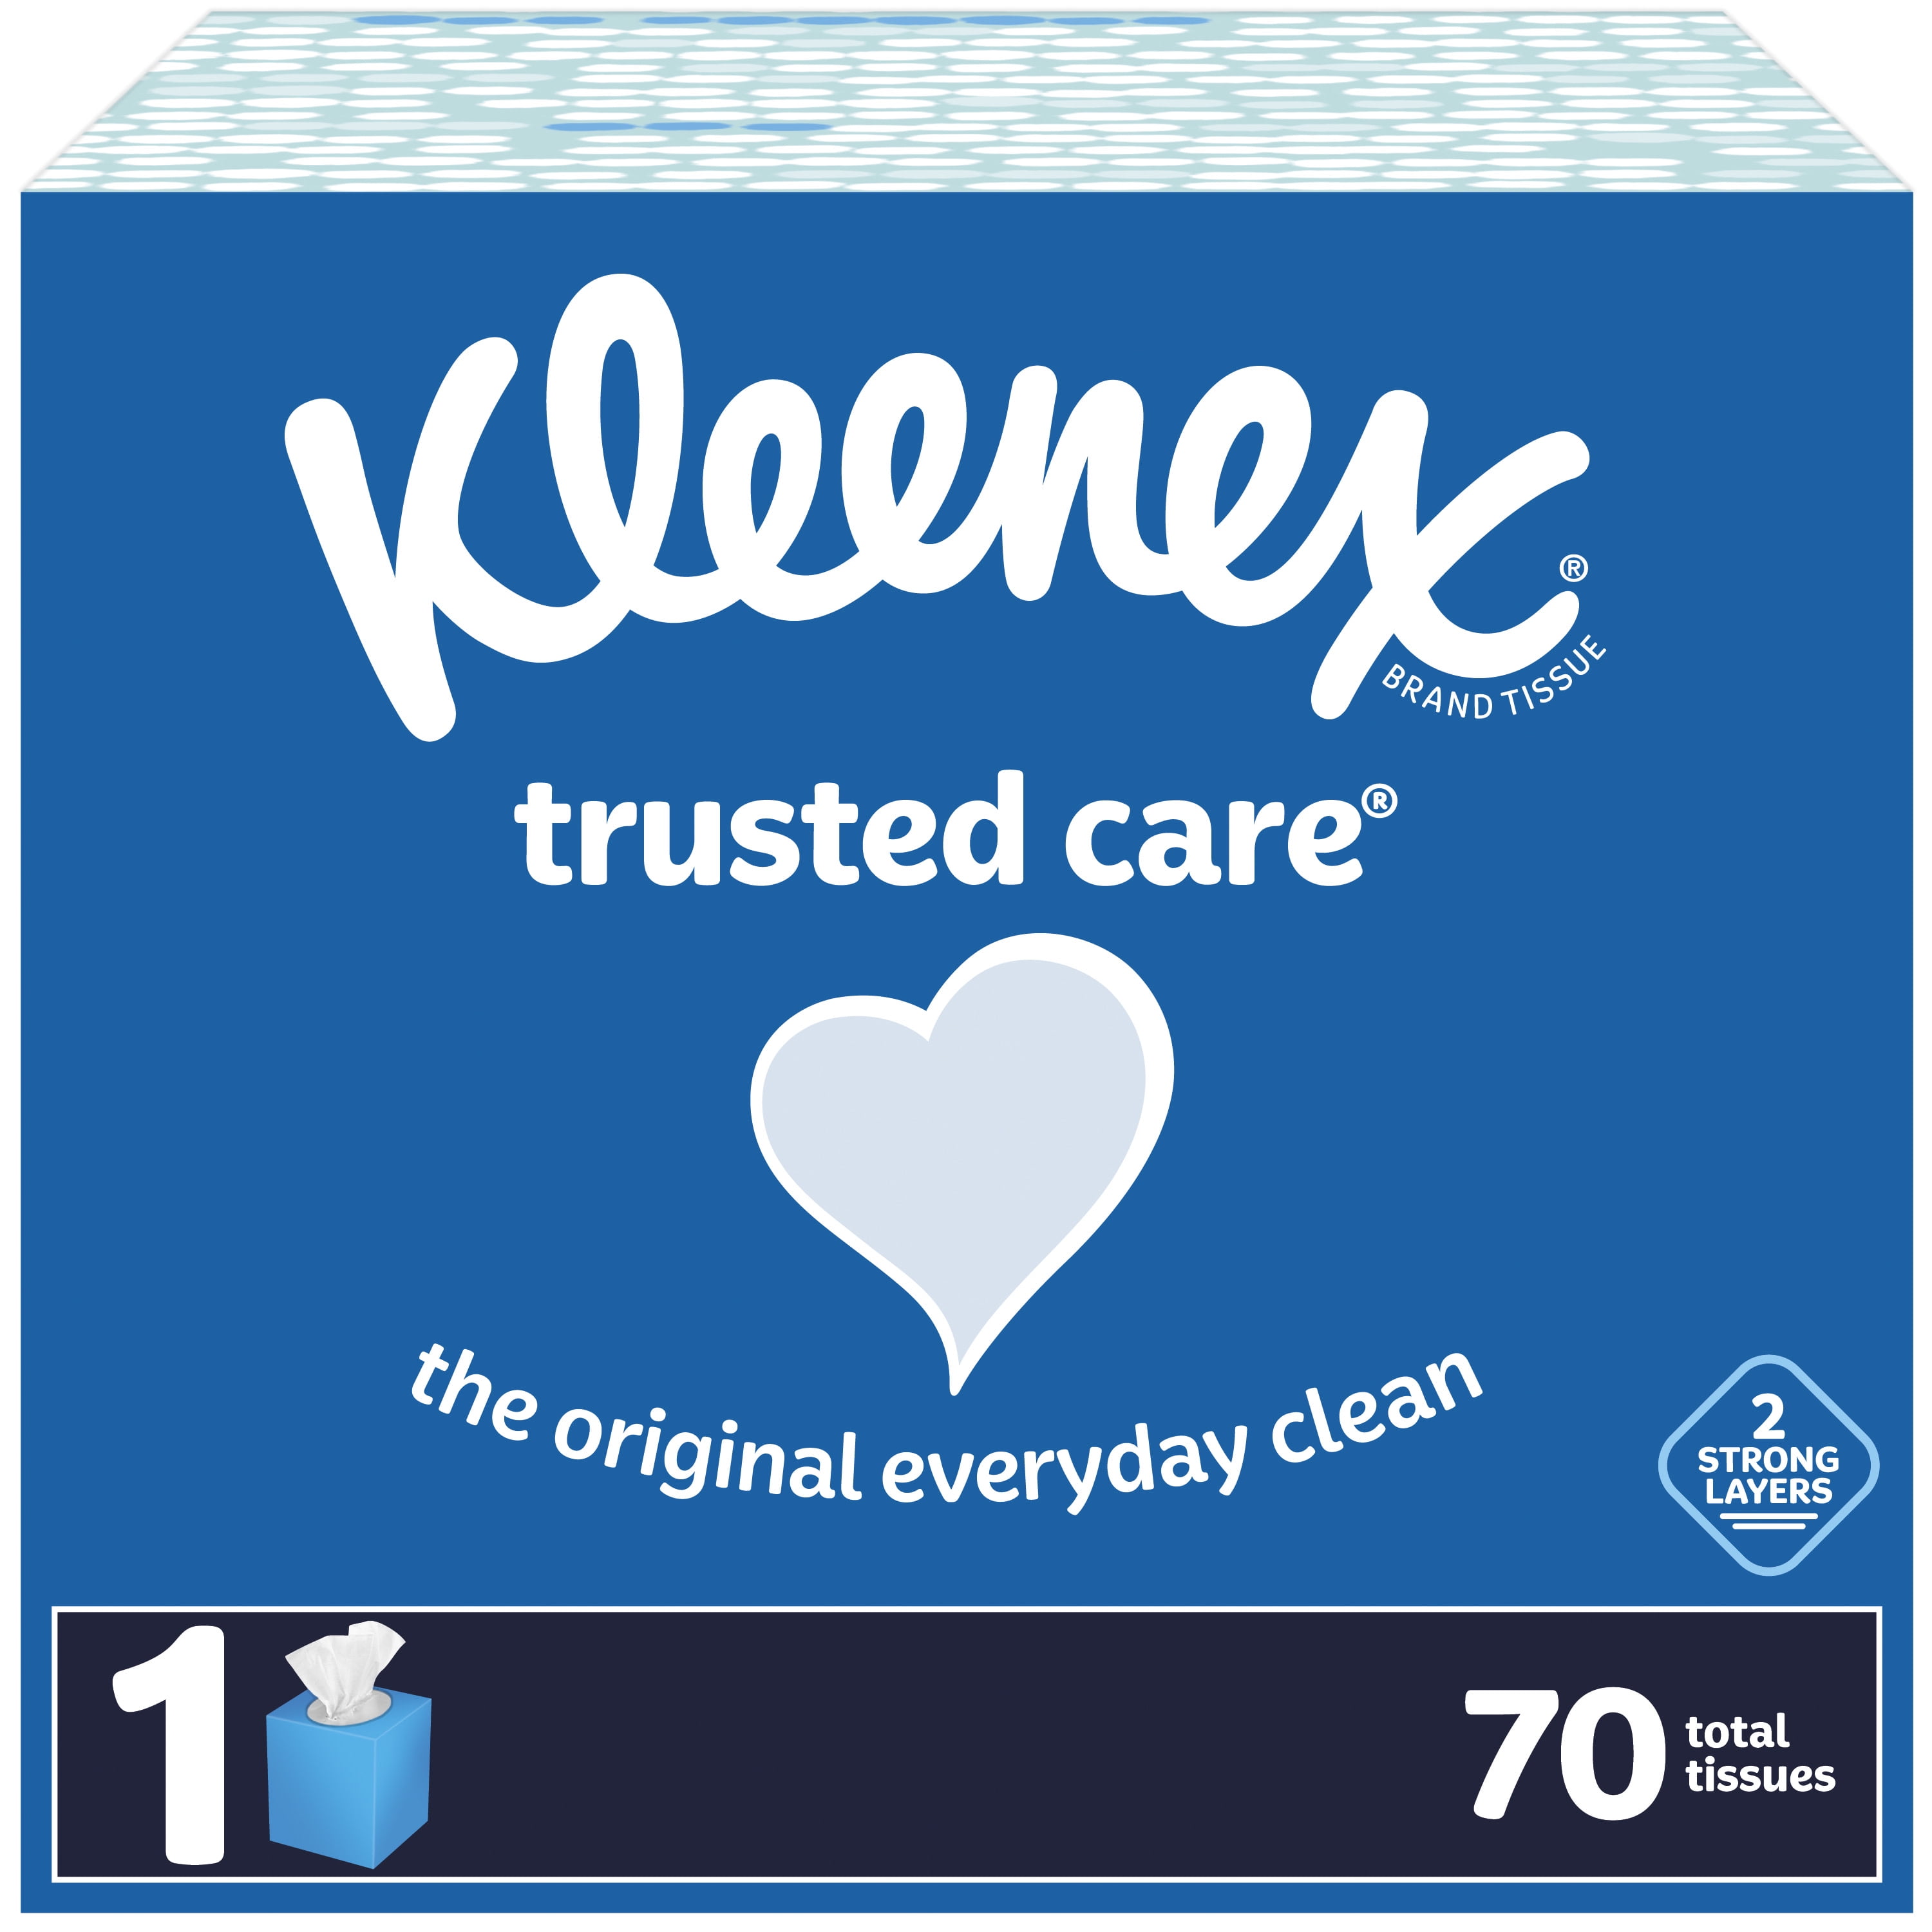 Kleenex Trusted Care Facial Tissues, 1 Cube Box (70 Total Tissues)